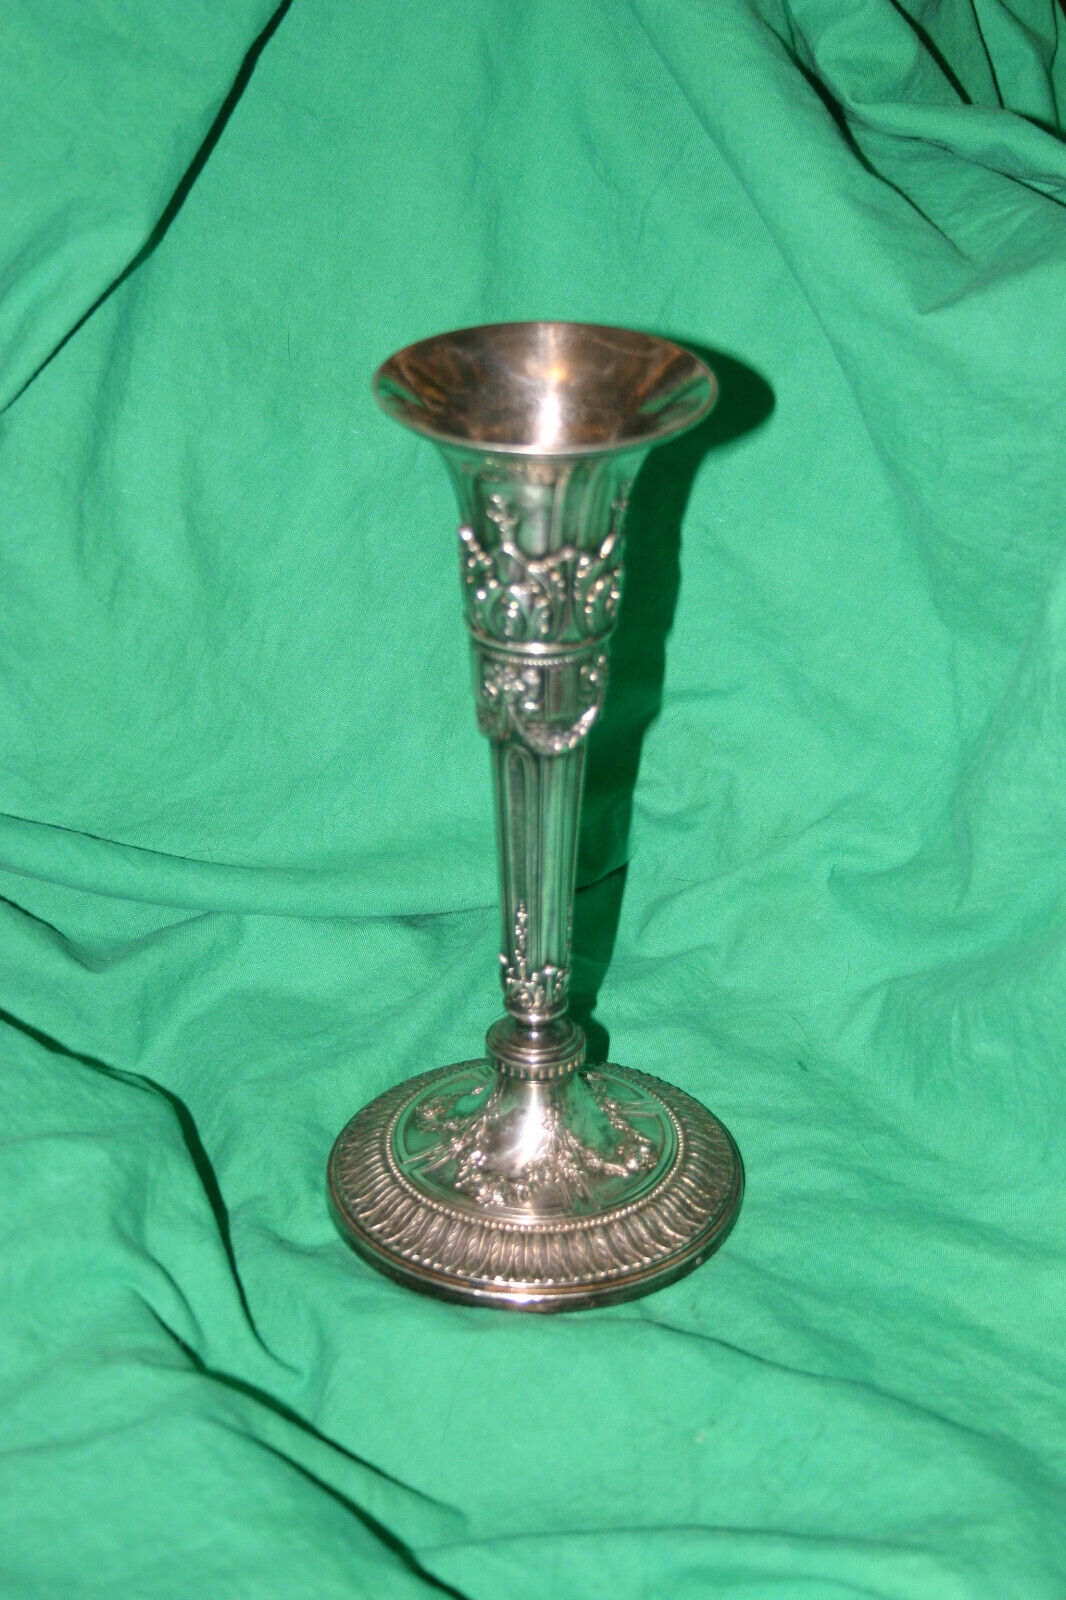 Primary image for 1929 WCTU OKLAHOMA TROPHY WOMENs CHRISTIAN TEMPERANCE PROHIBITION SILVER PLATE